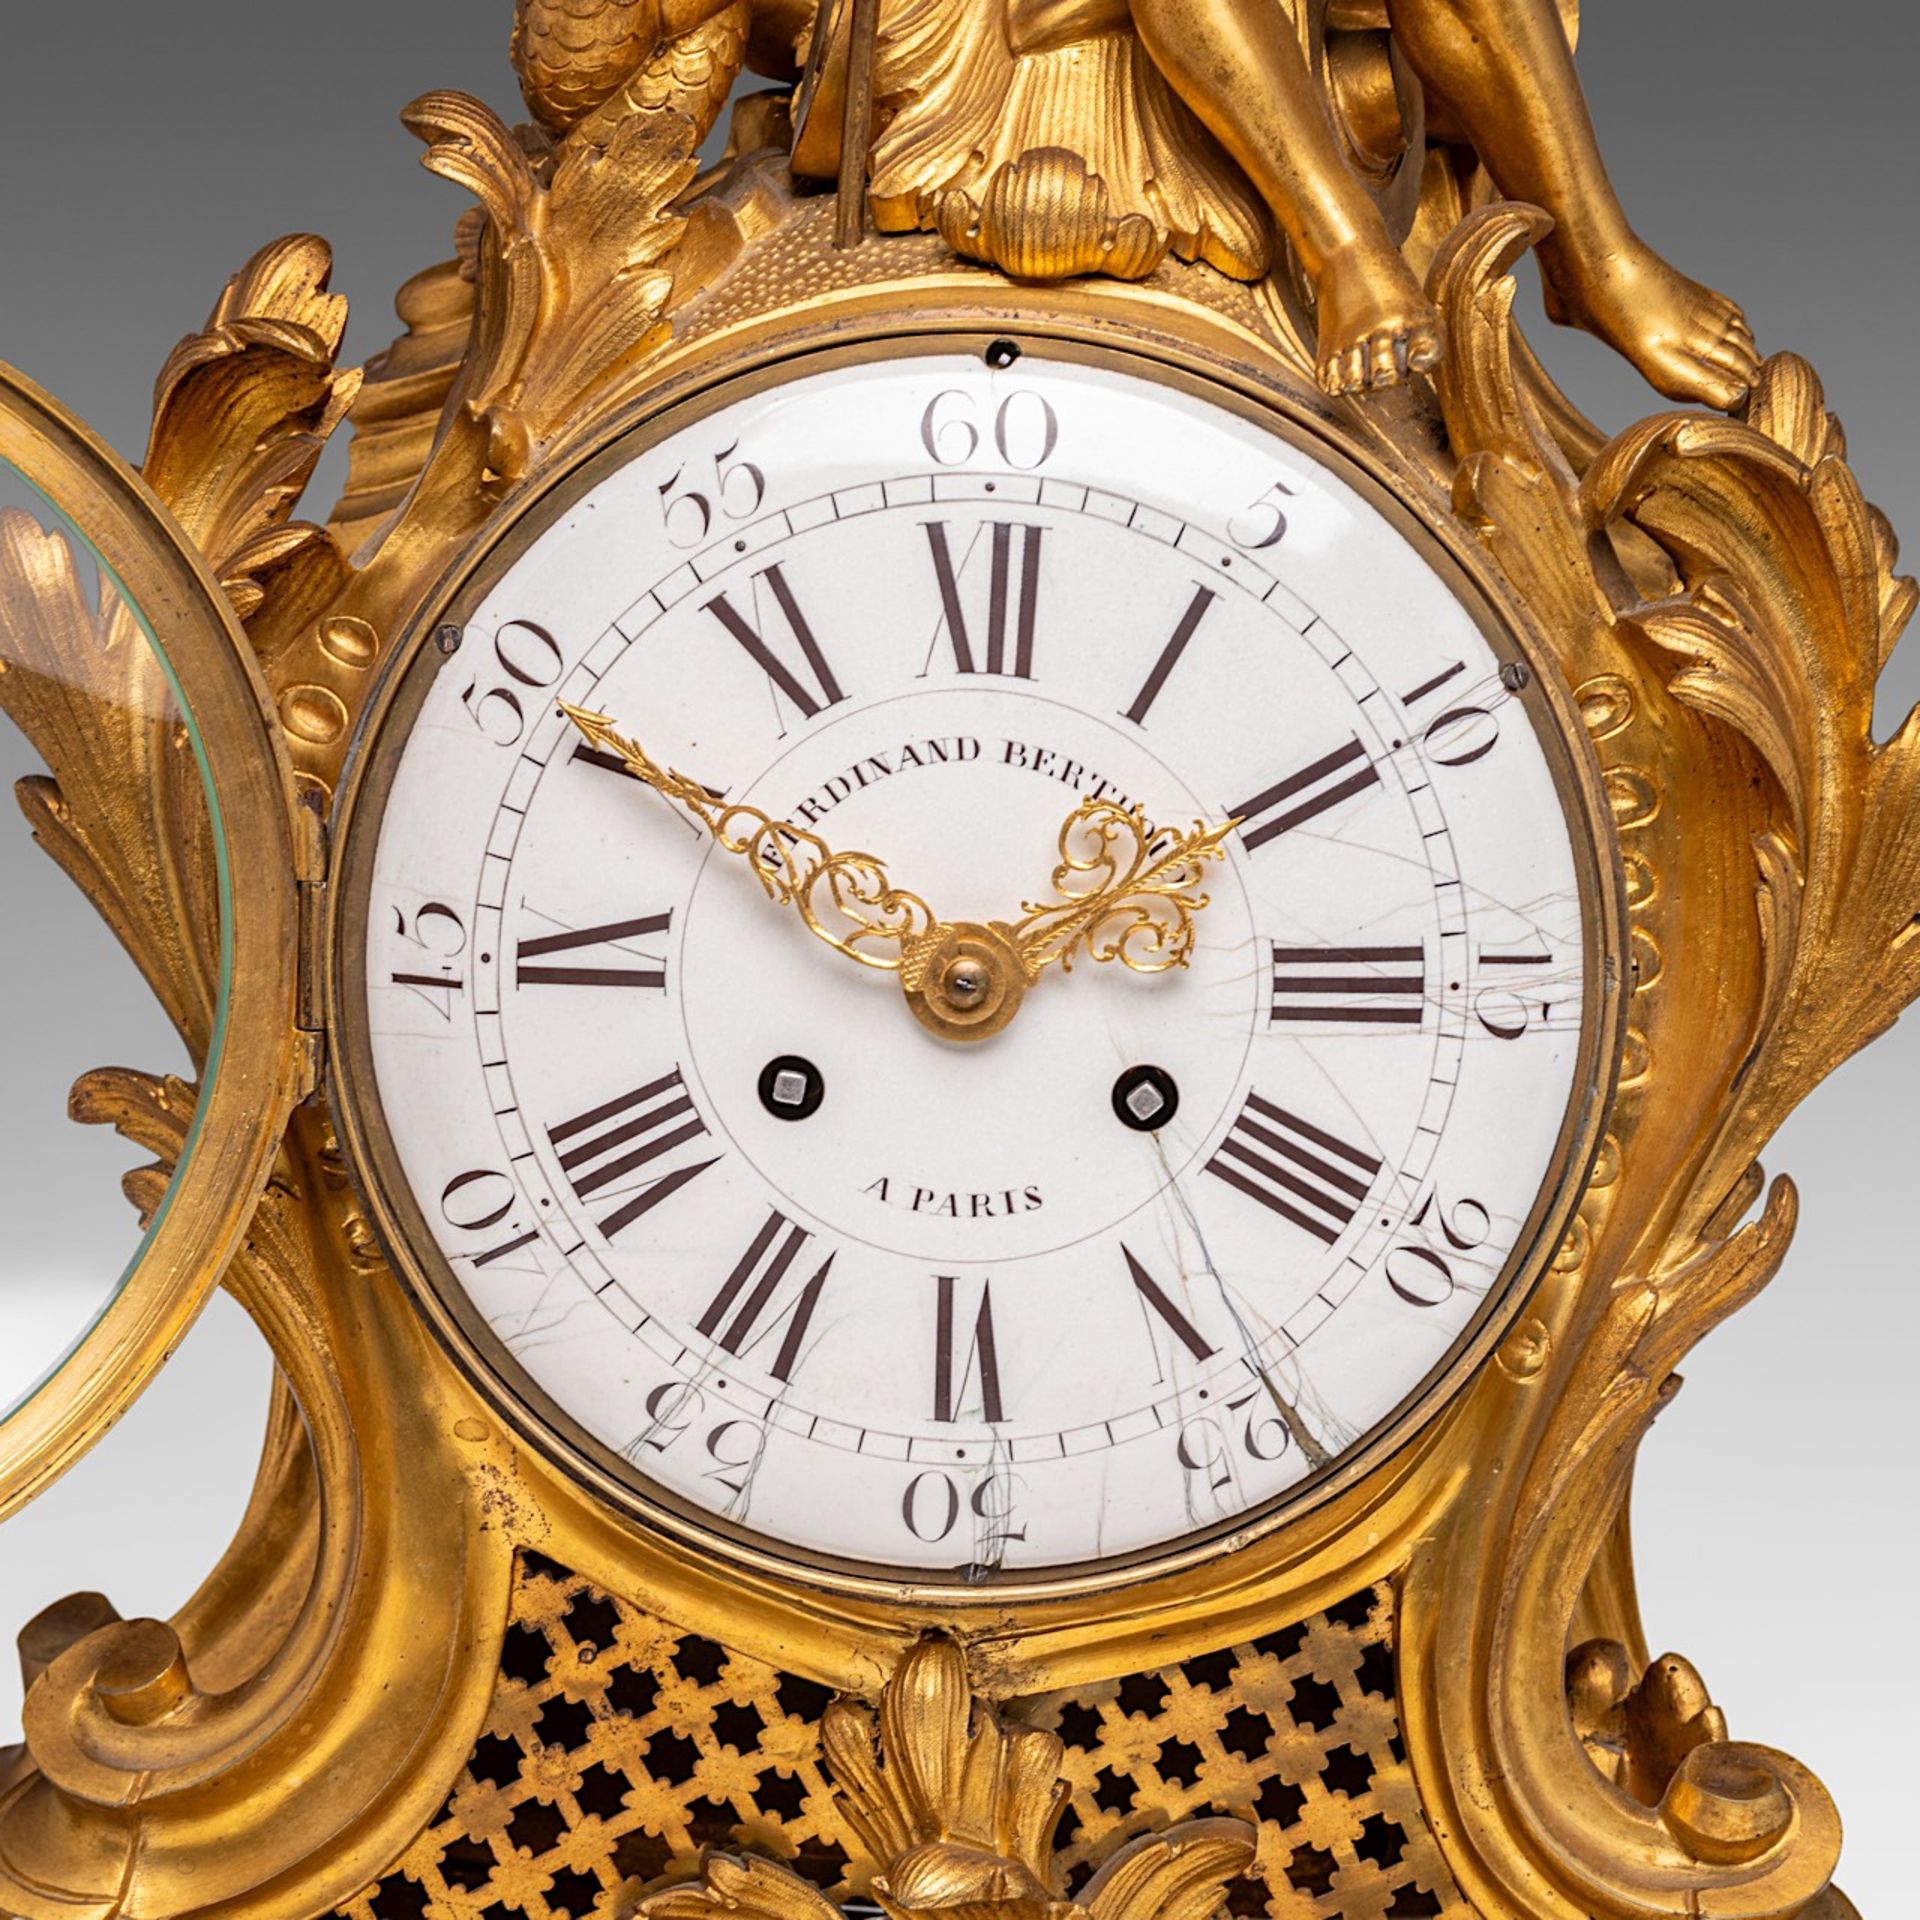 A Rococo Revival gilt bronze mantle clock, decorated with Neptune, Ferdinand Berthoud, H 71 cm - Image 2 of 9